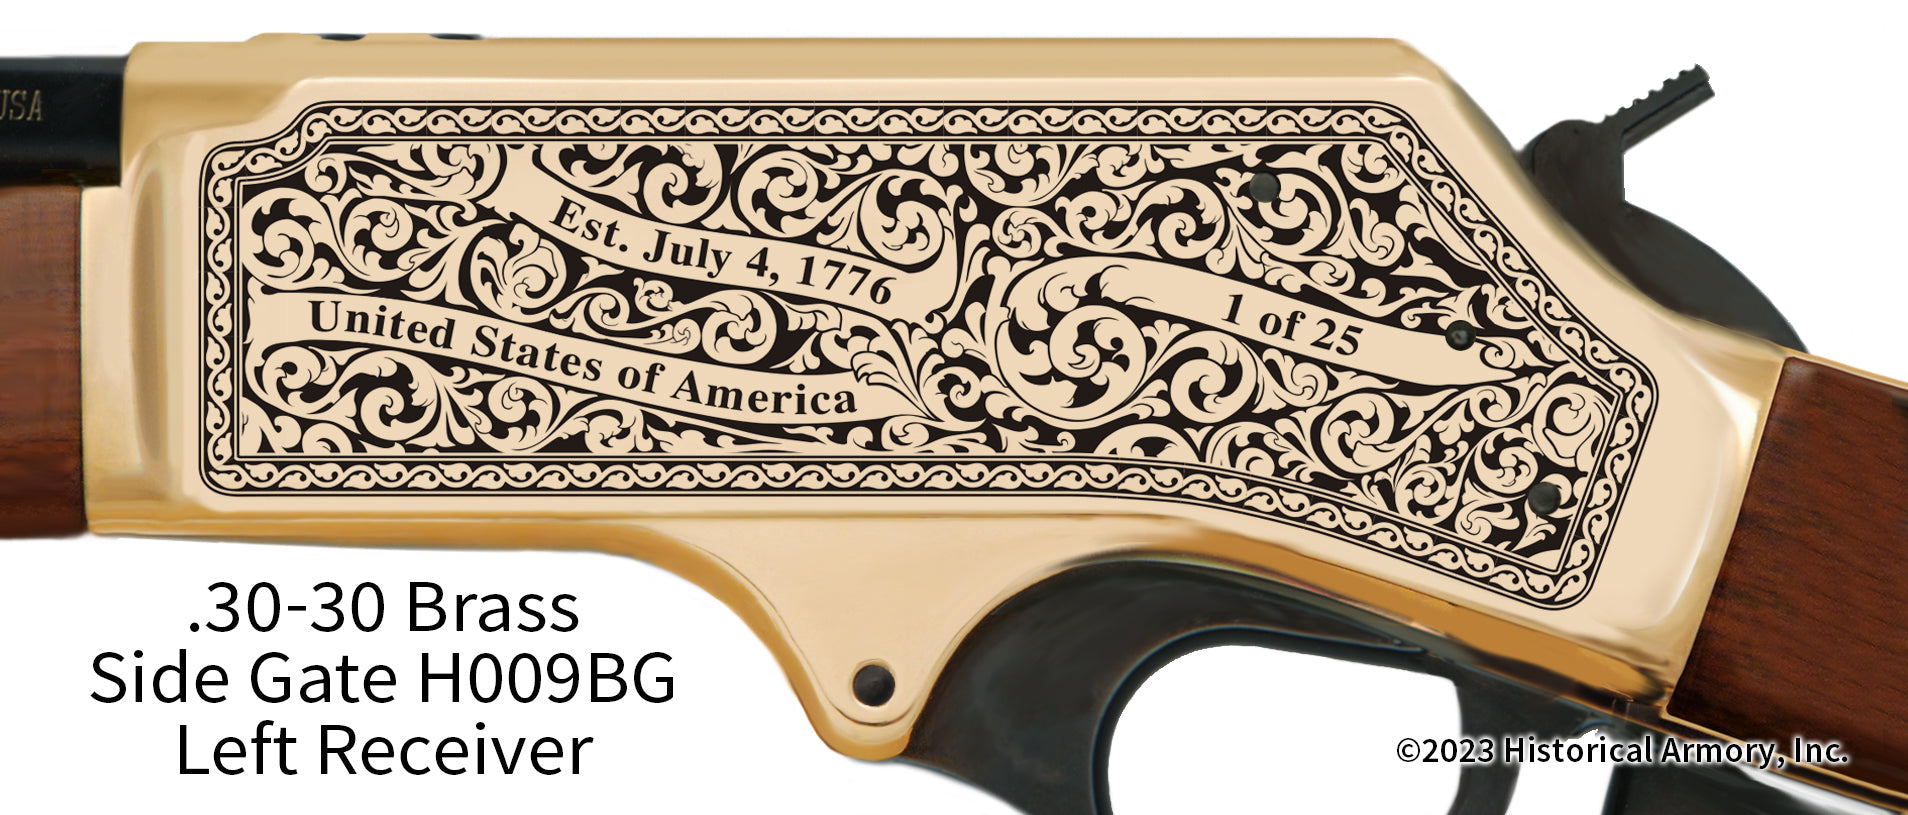 Boone County Kentucky Engraved Henry .30-30 Brass Side Gate Rifle